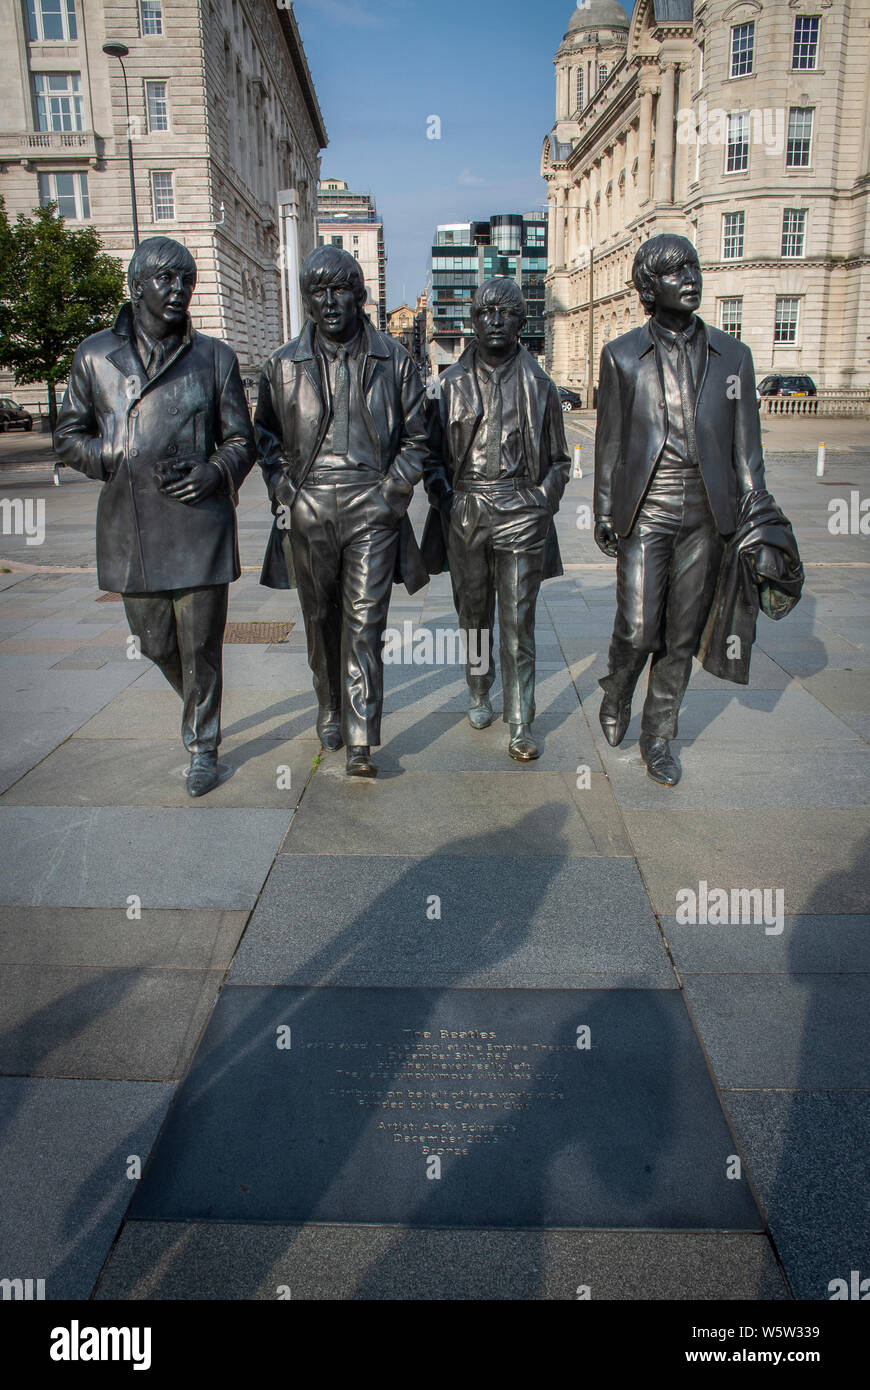 The Beatles statue at Pier Head, Liverpool. UK. Stock Photo